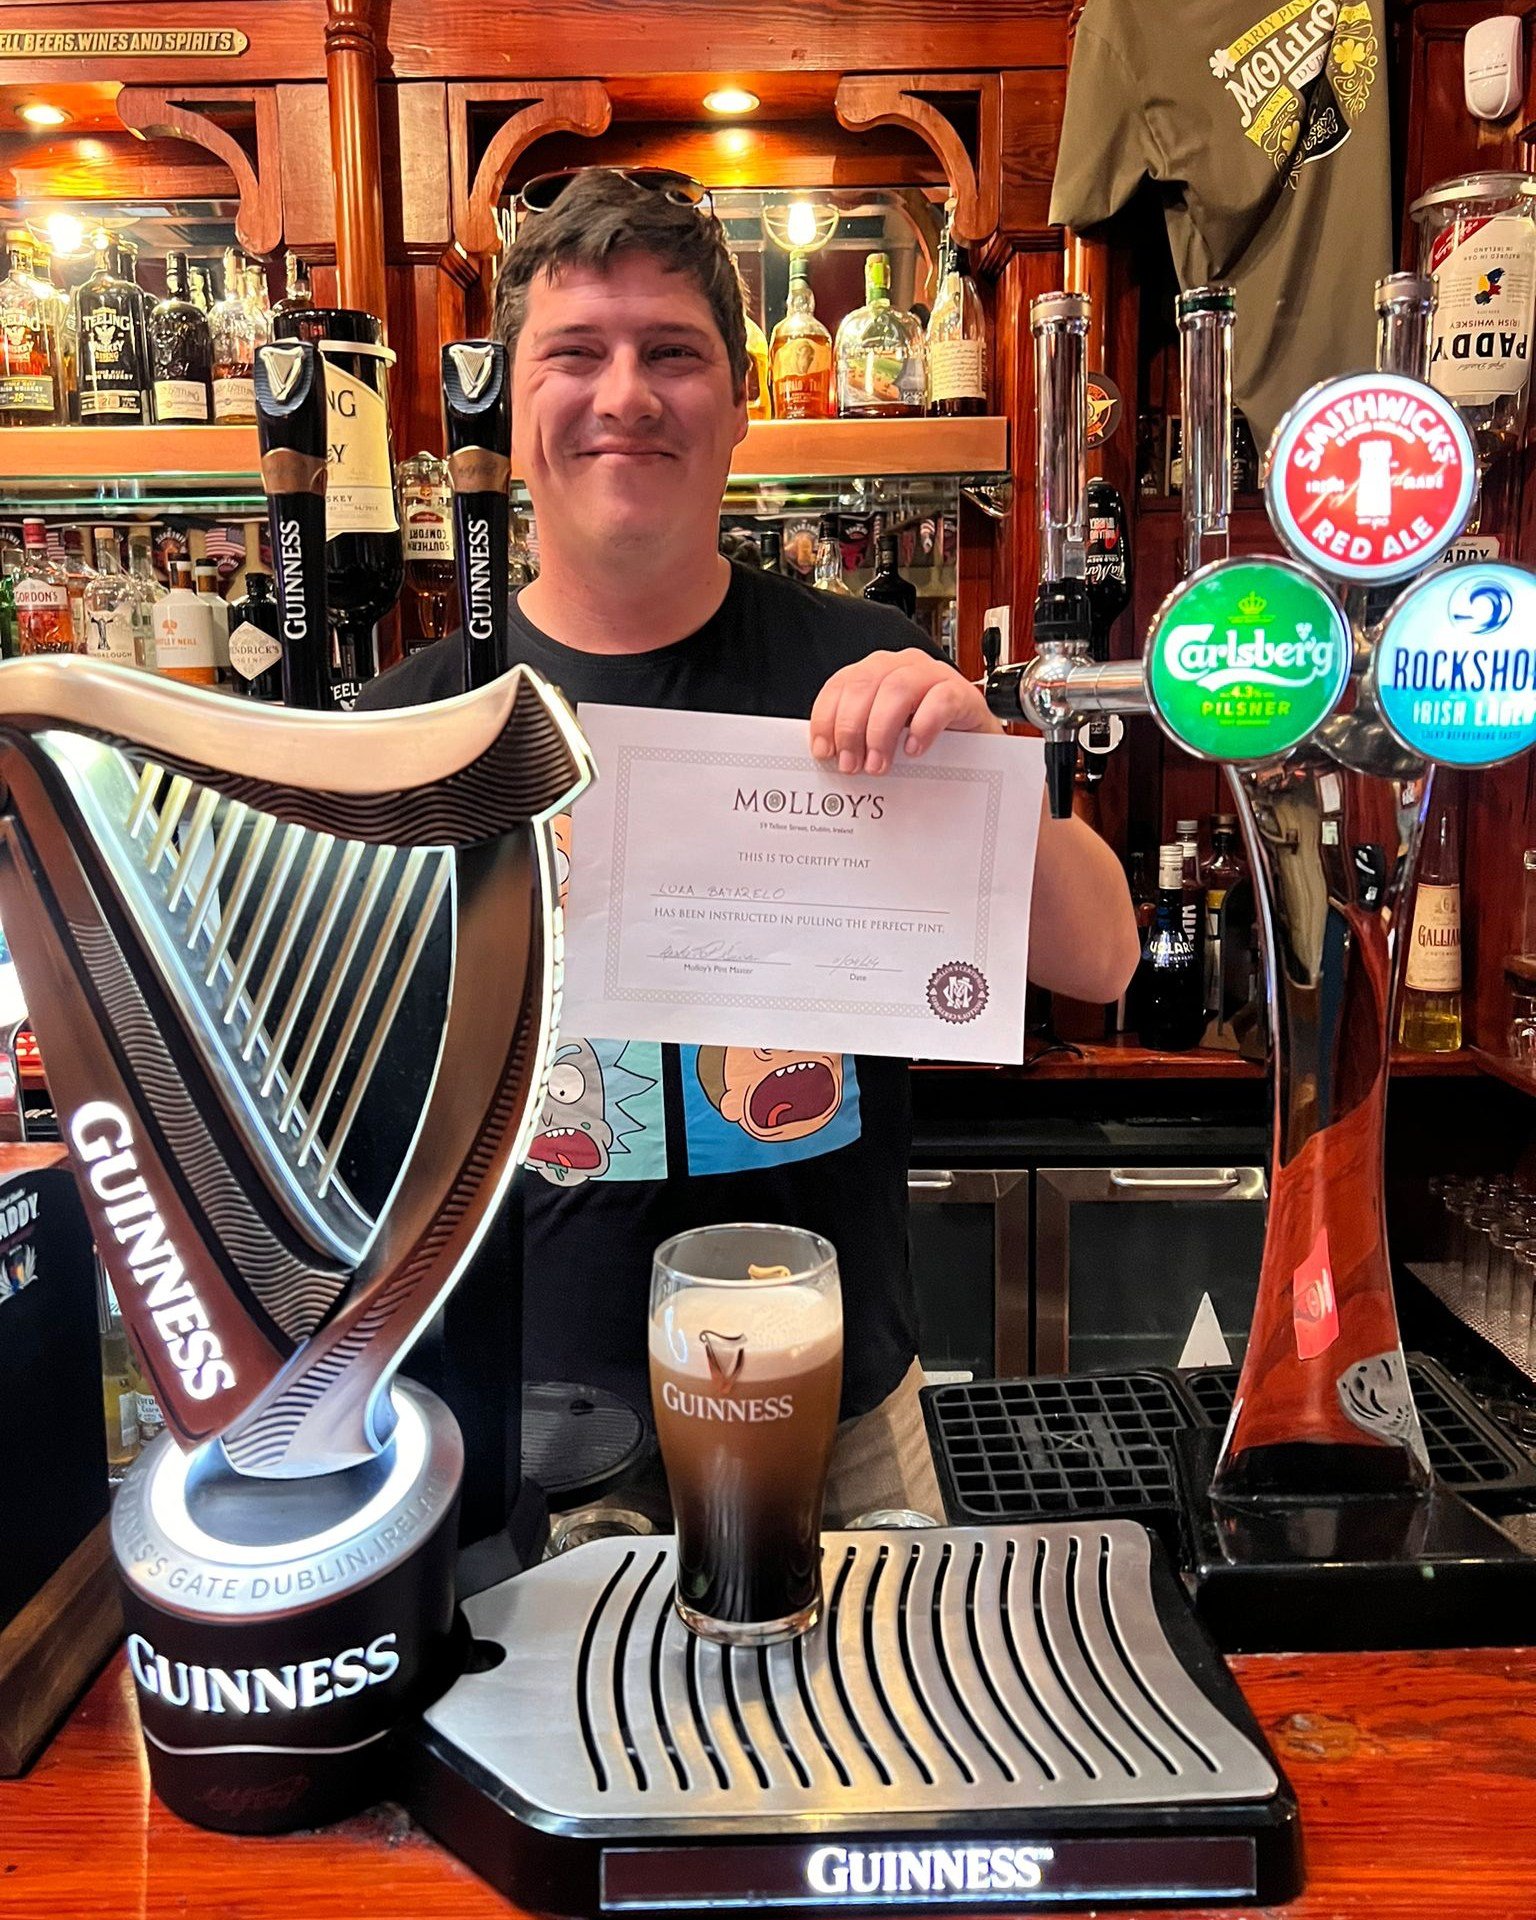 Our very own pint-pouring prodigy has just been certified in the art of the perfect pour. Cheers to raising the bar and pouring our hearts into every glass! Come on down and let the master show you how it's done &ndash; your perfect pint awaits! 

#P